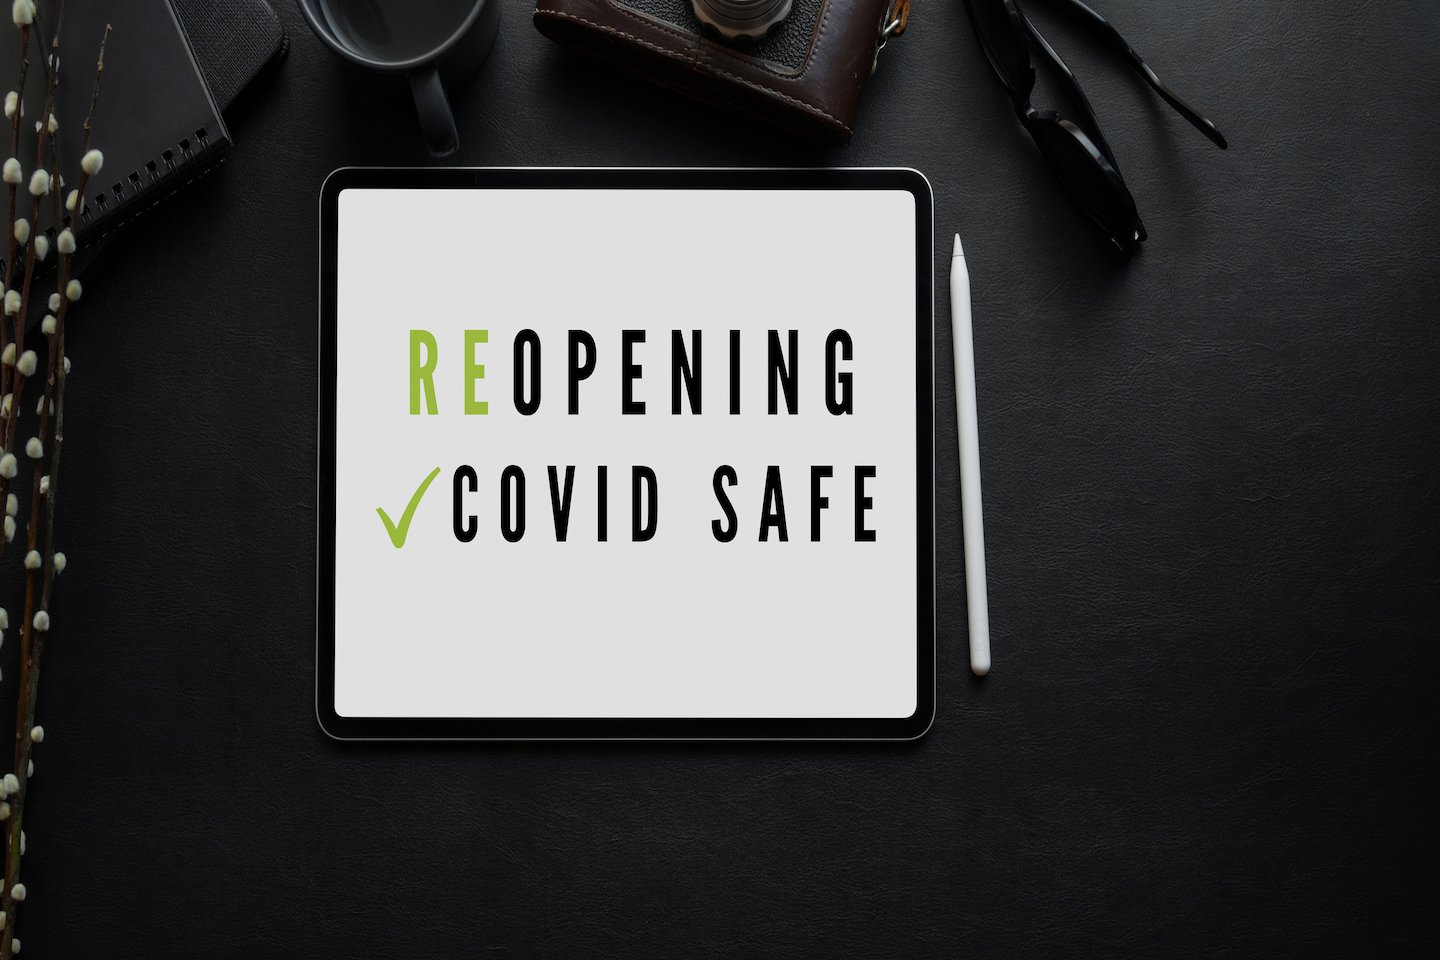 How to Get Your Business Ready for Life After COVID-19